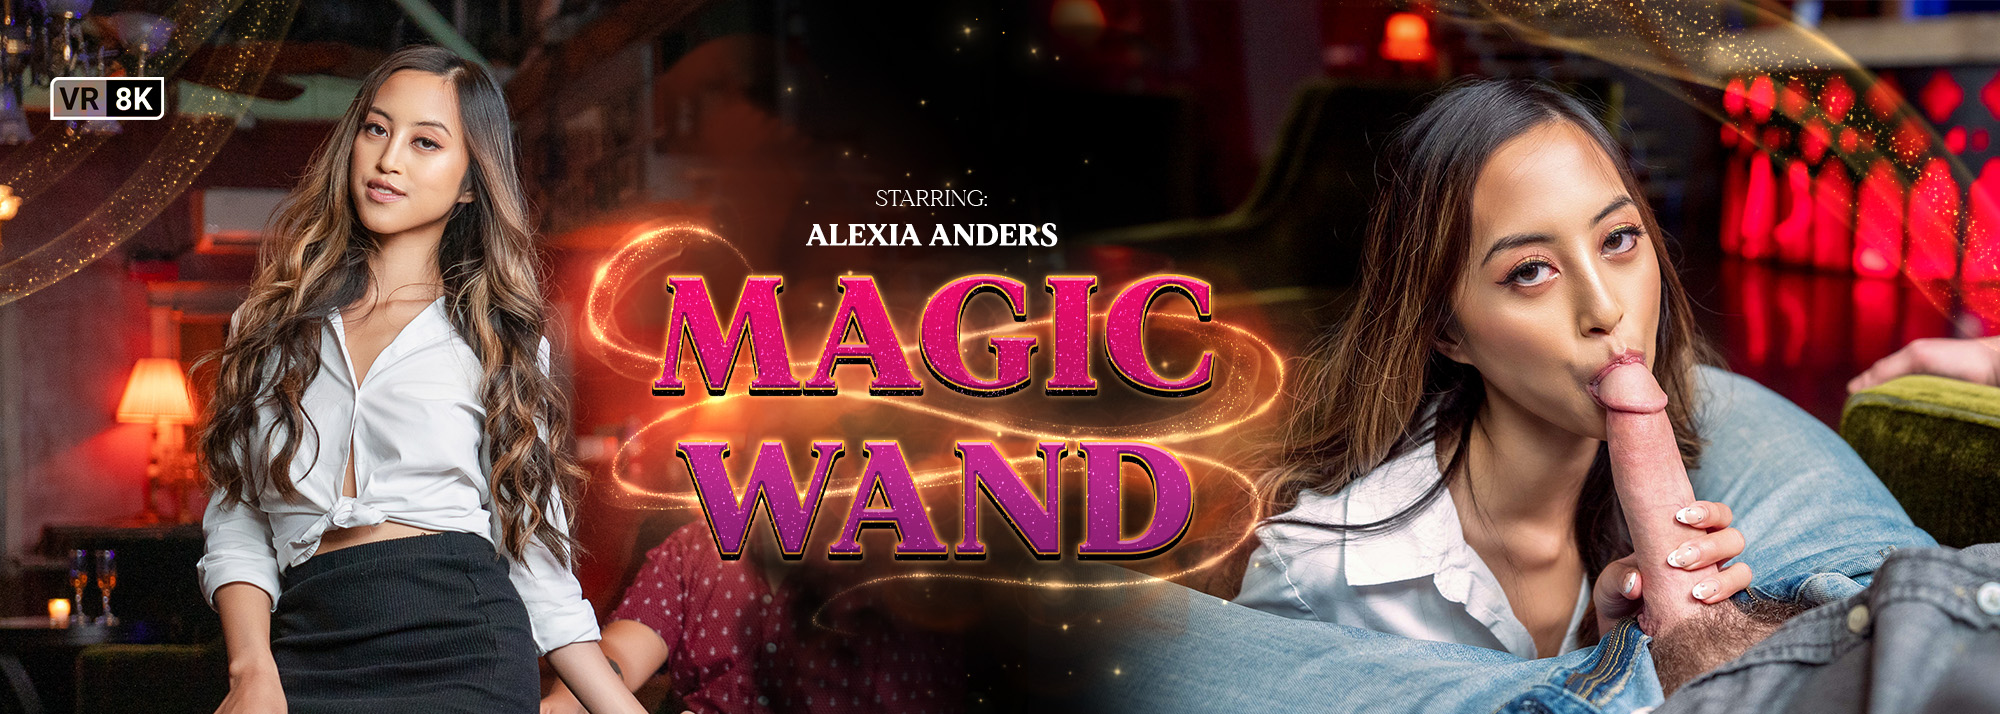 Magic Wand - VR Porn Video, Starring: Alexia Anders